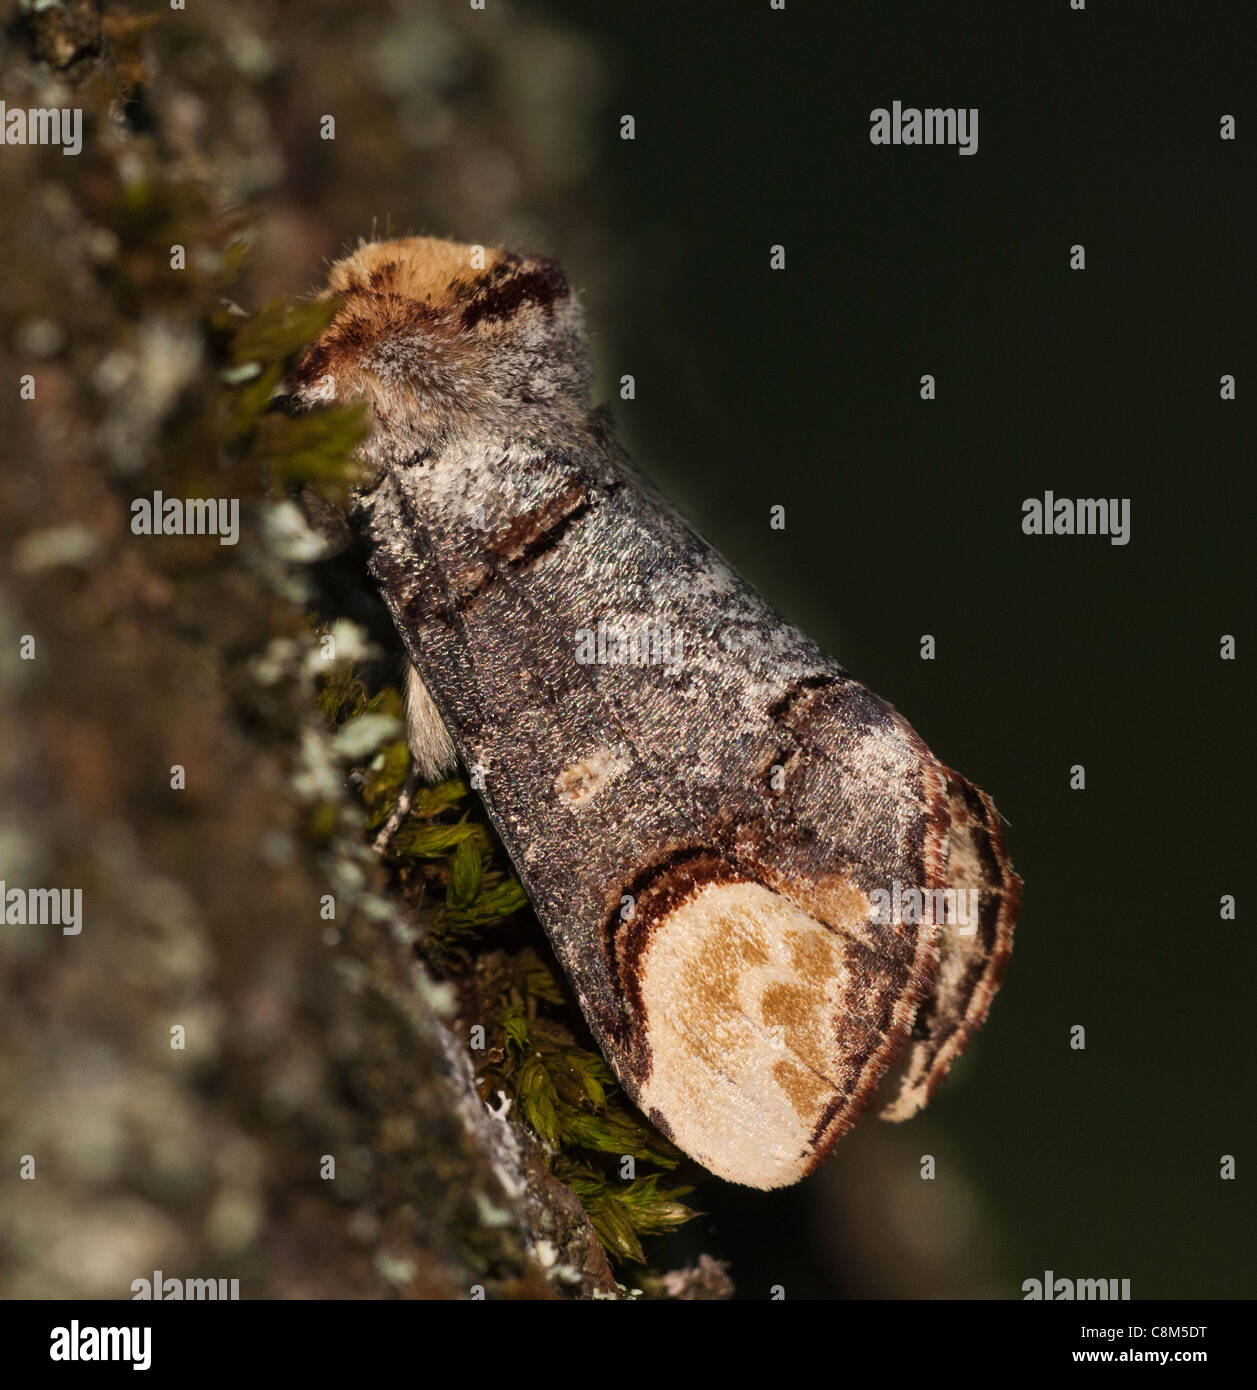 Buff tip moth showing its twig like qualities used for disguise. Stock Photo